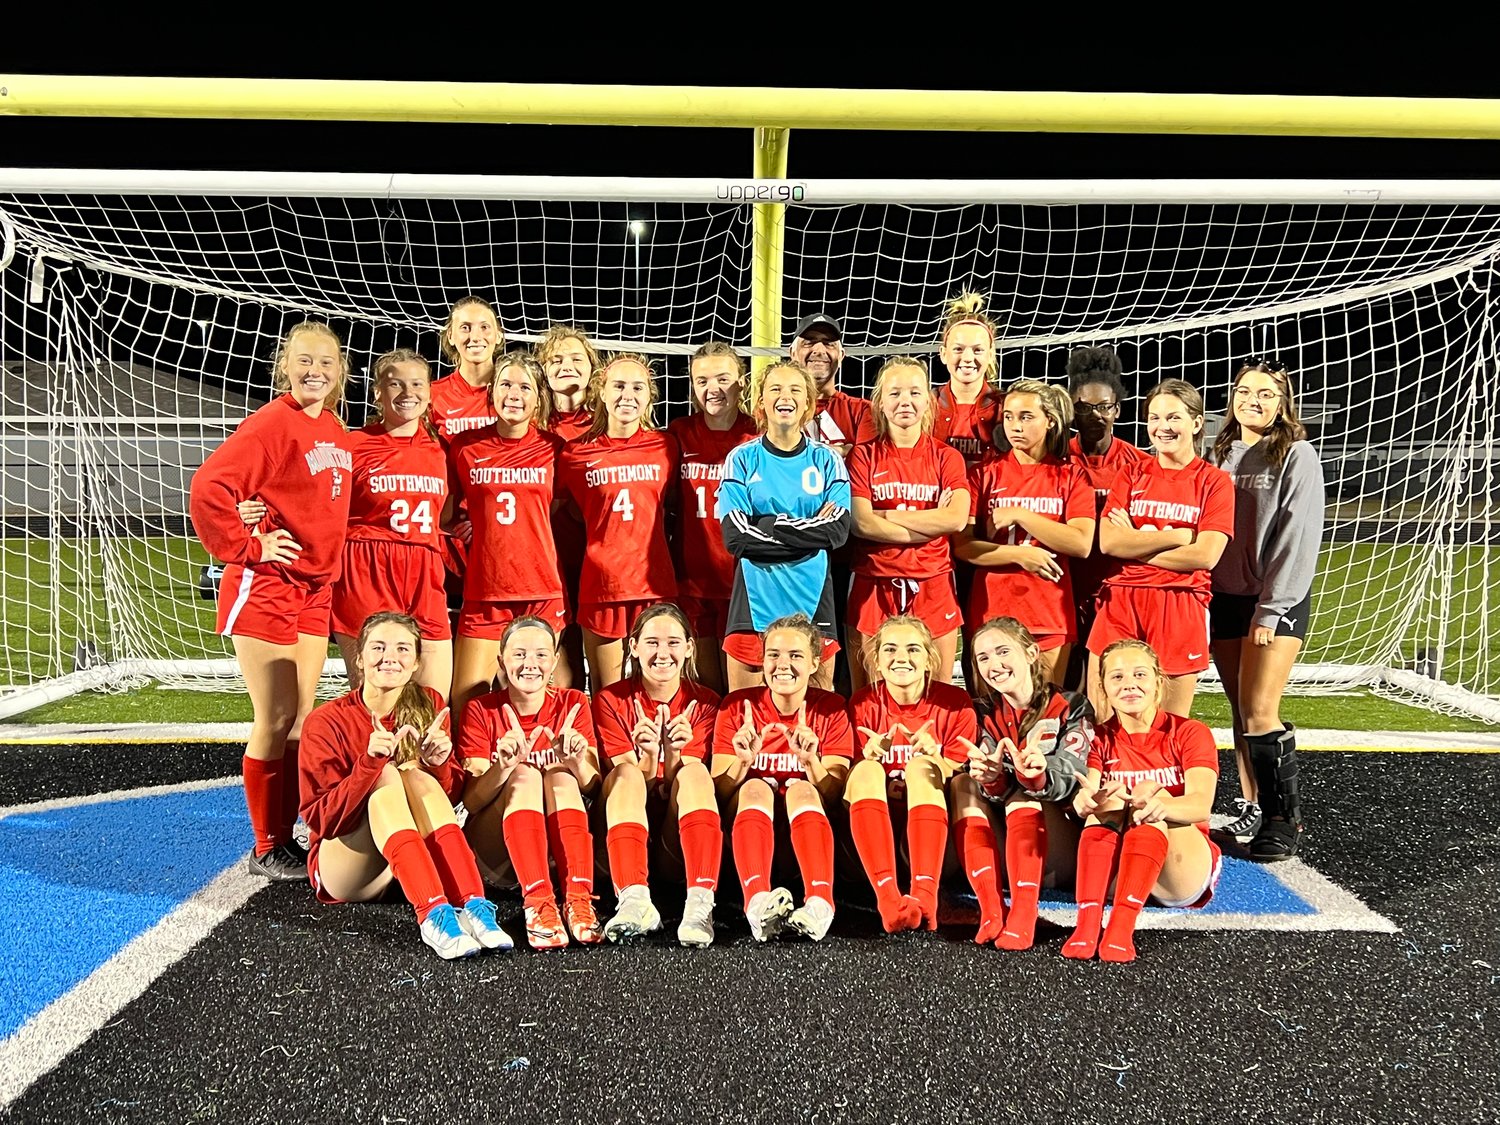 Southmont girls soccer got their sectional started in a big way with a dominating 7-0 win over South Vermillion.